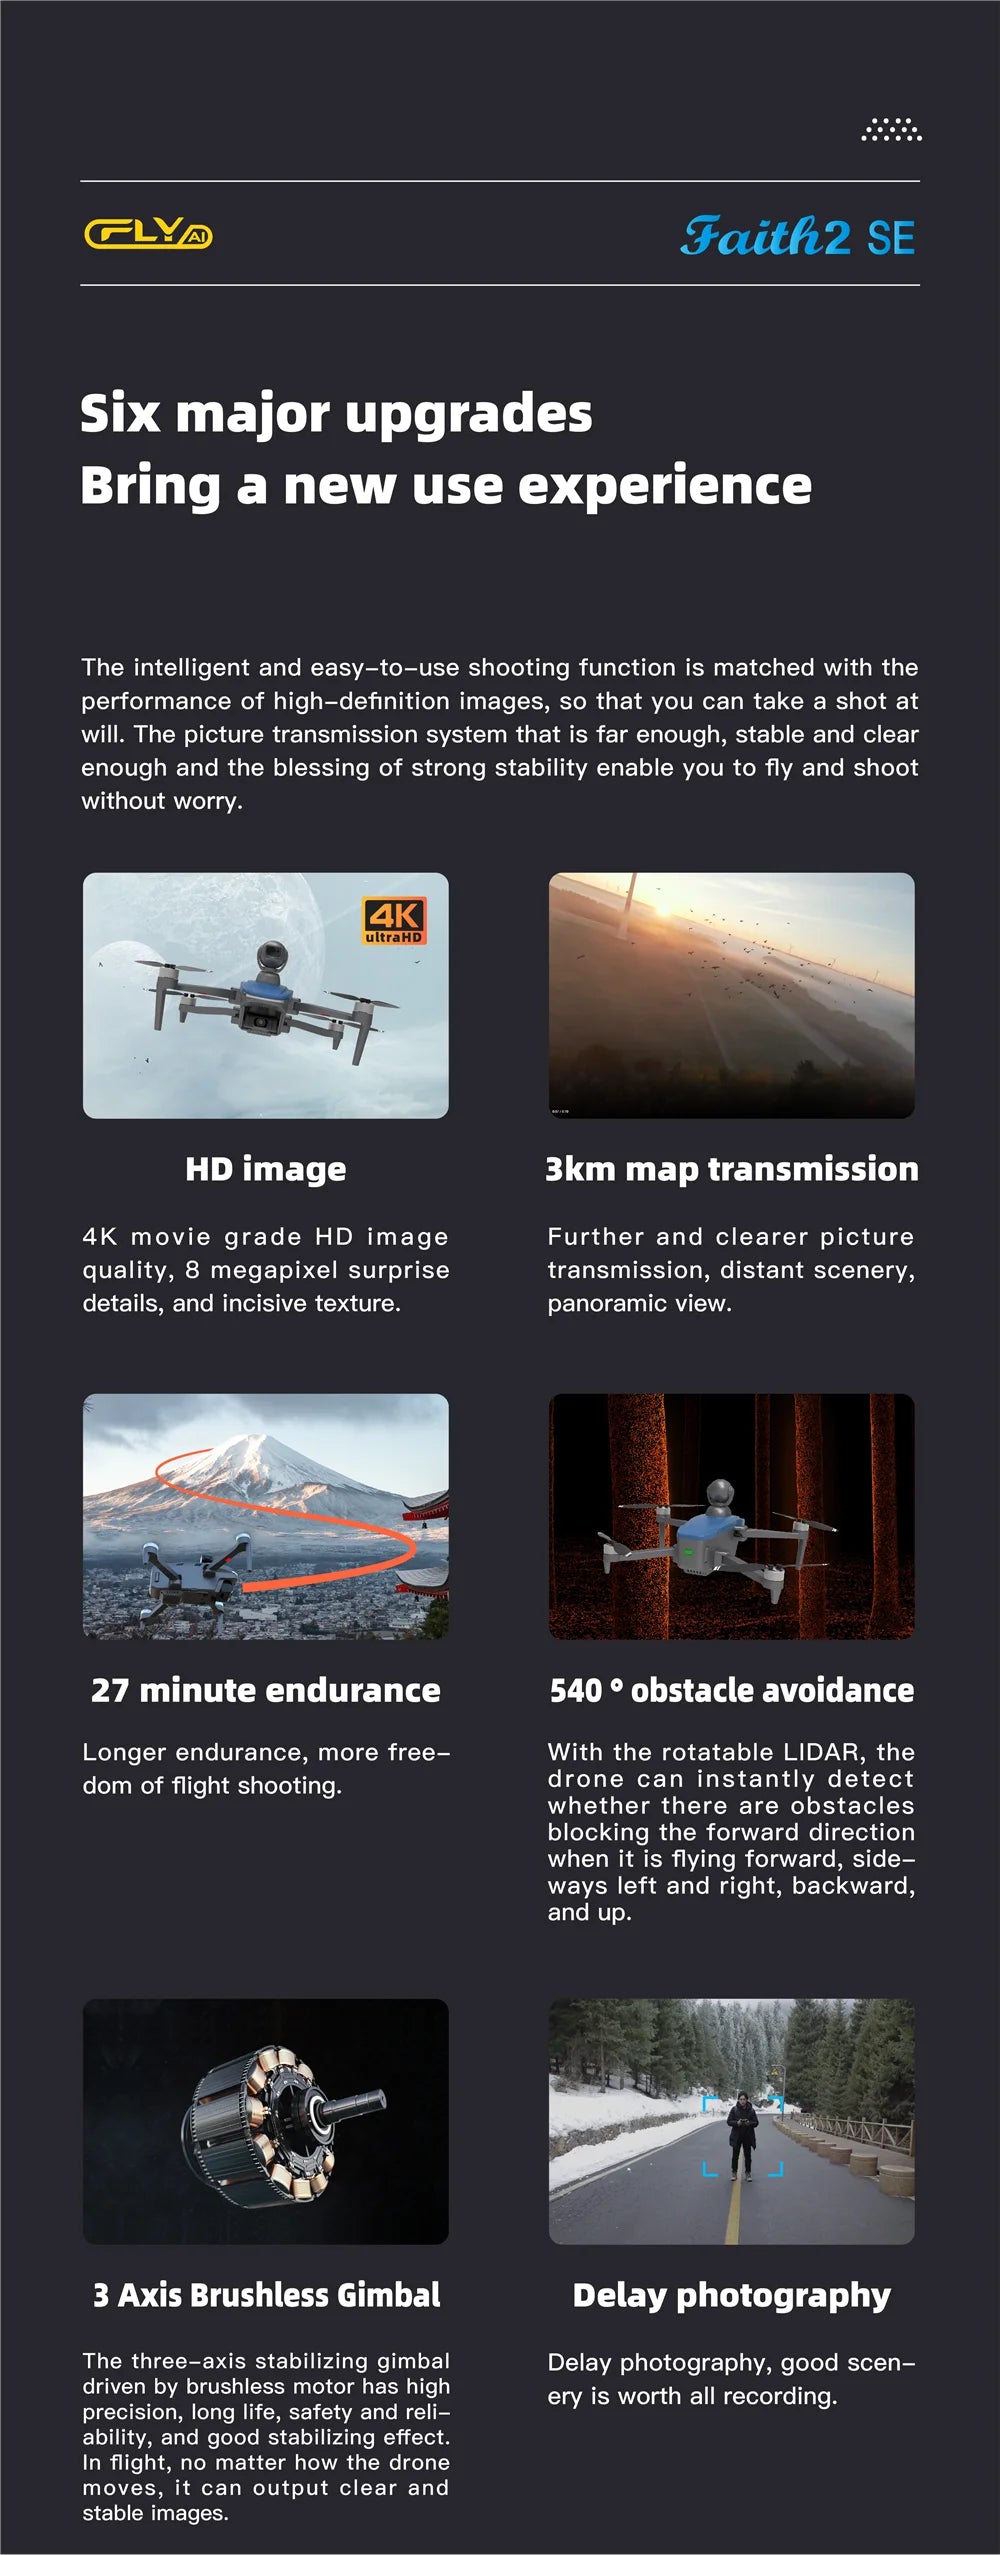 CFLY Faith2 SE Drone, AK ultraHD image 3km map transmission 4K movie grade HD image Further and clearer